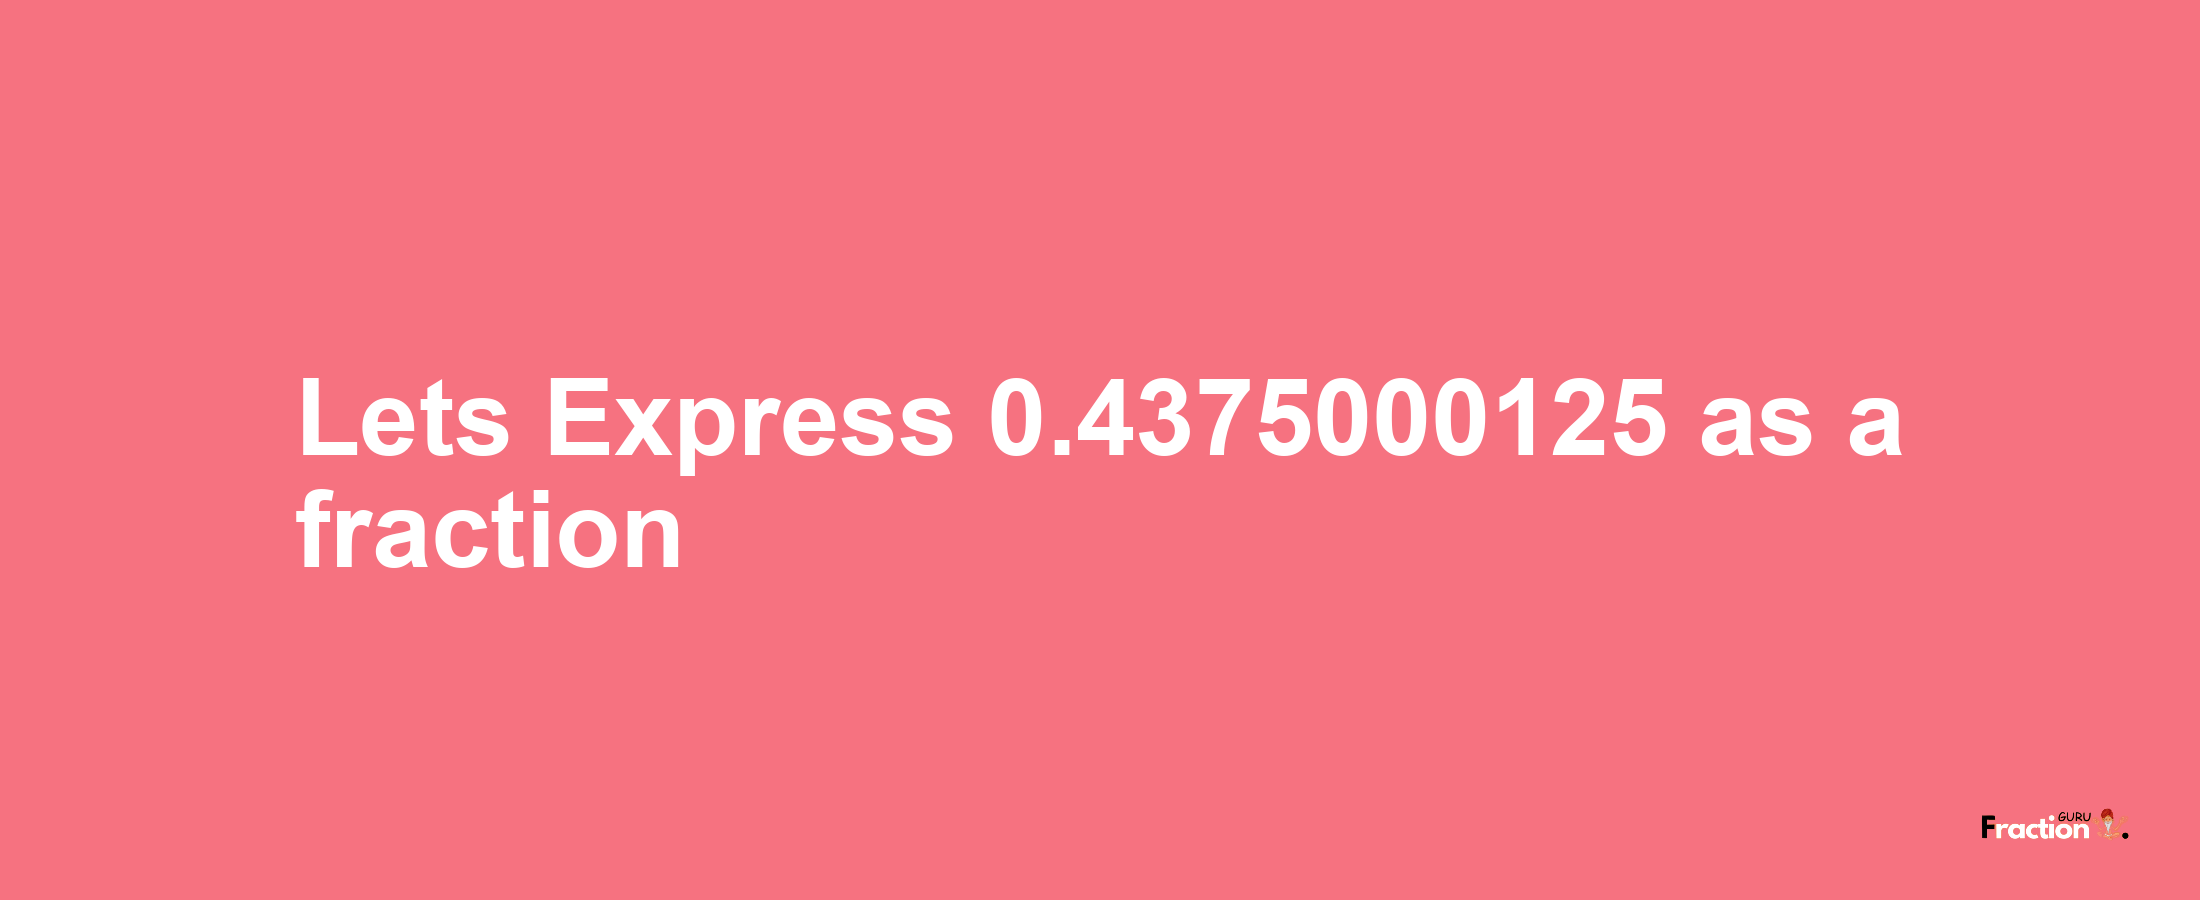 Lets Express 0.4375000125 as afraction